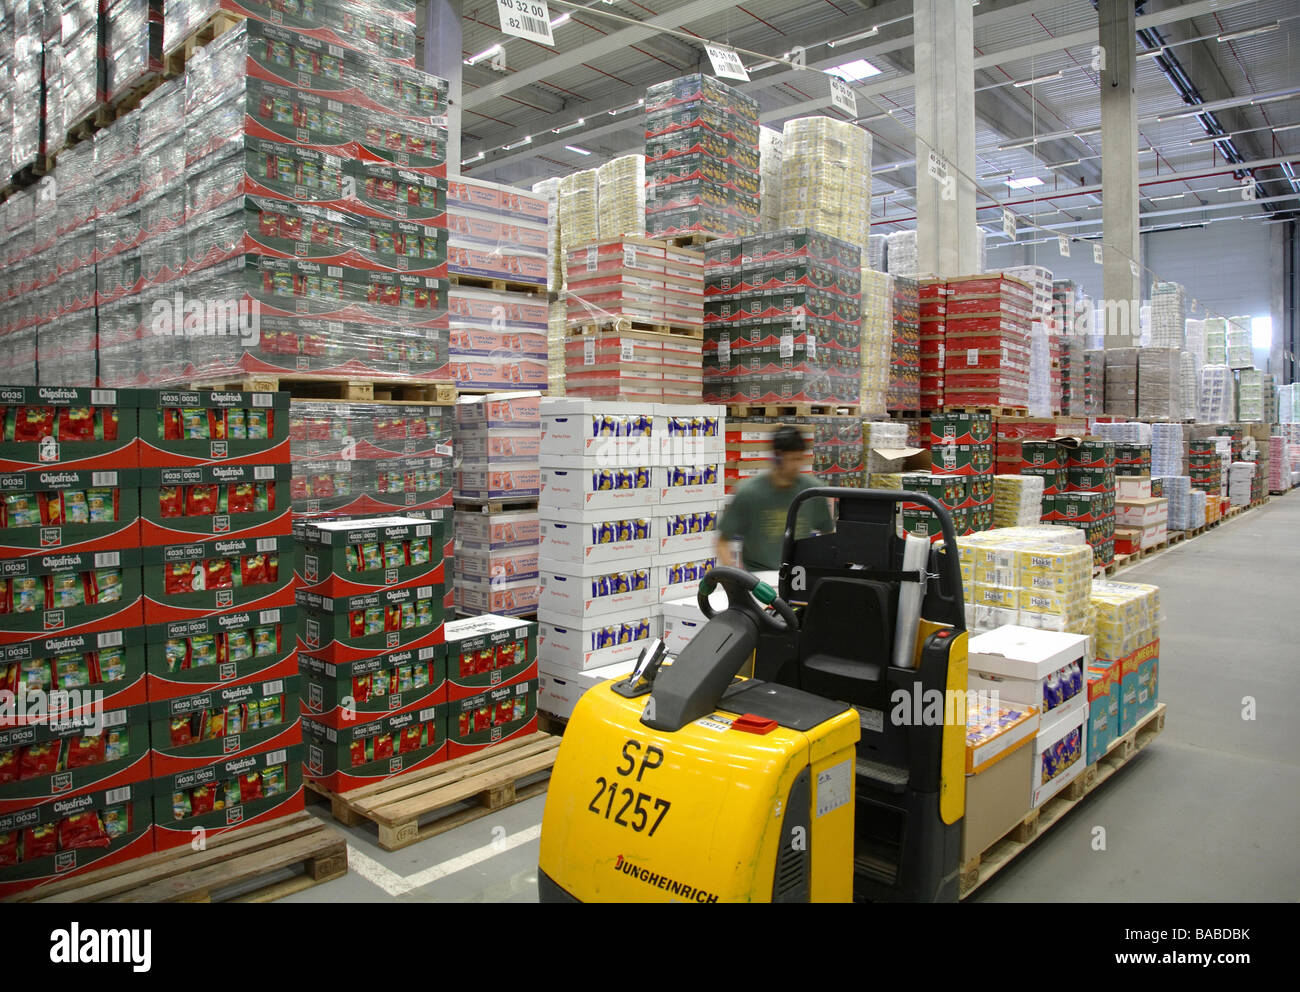 Edeka Logistic centre in Hamm, Germany Stock Photo